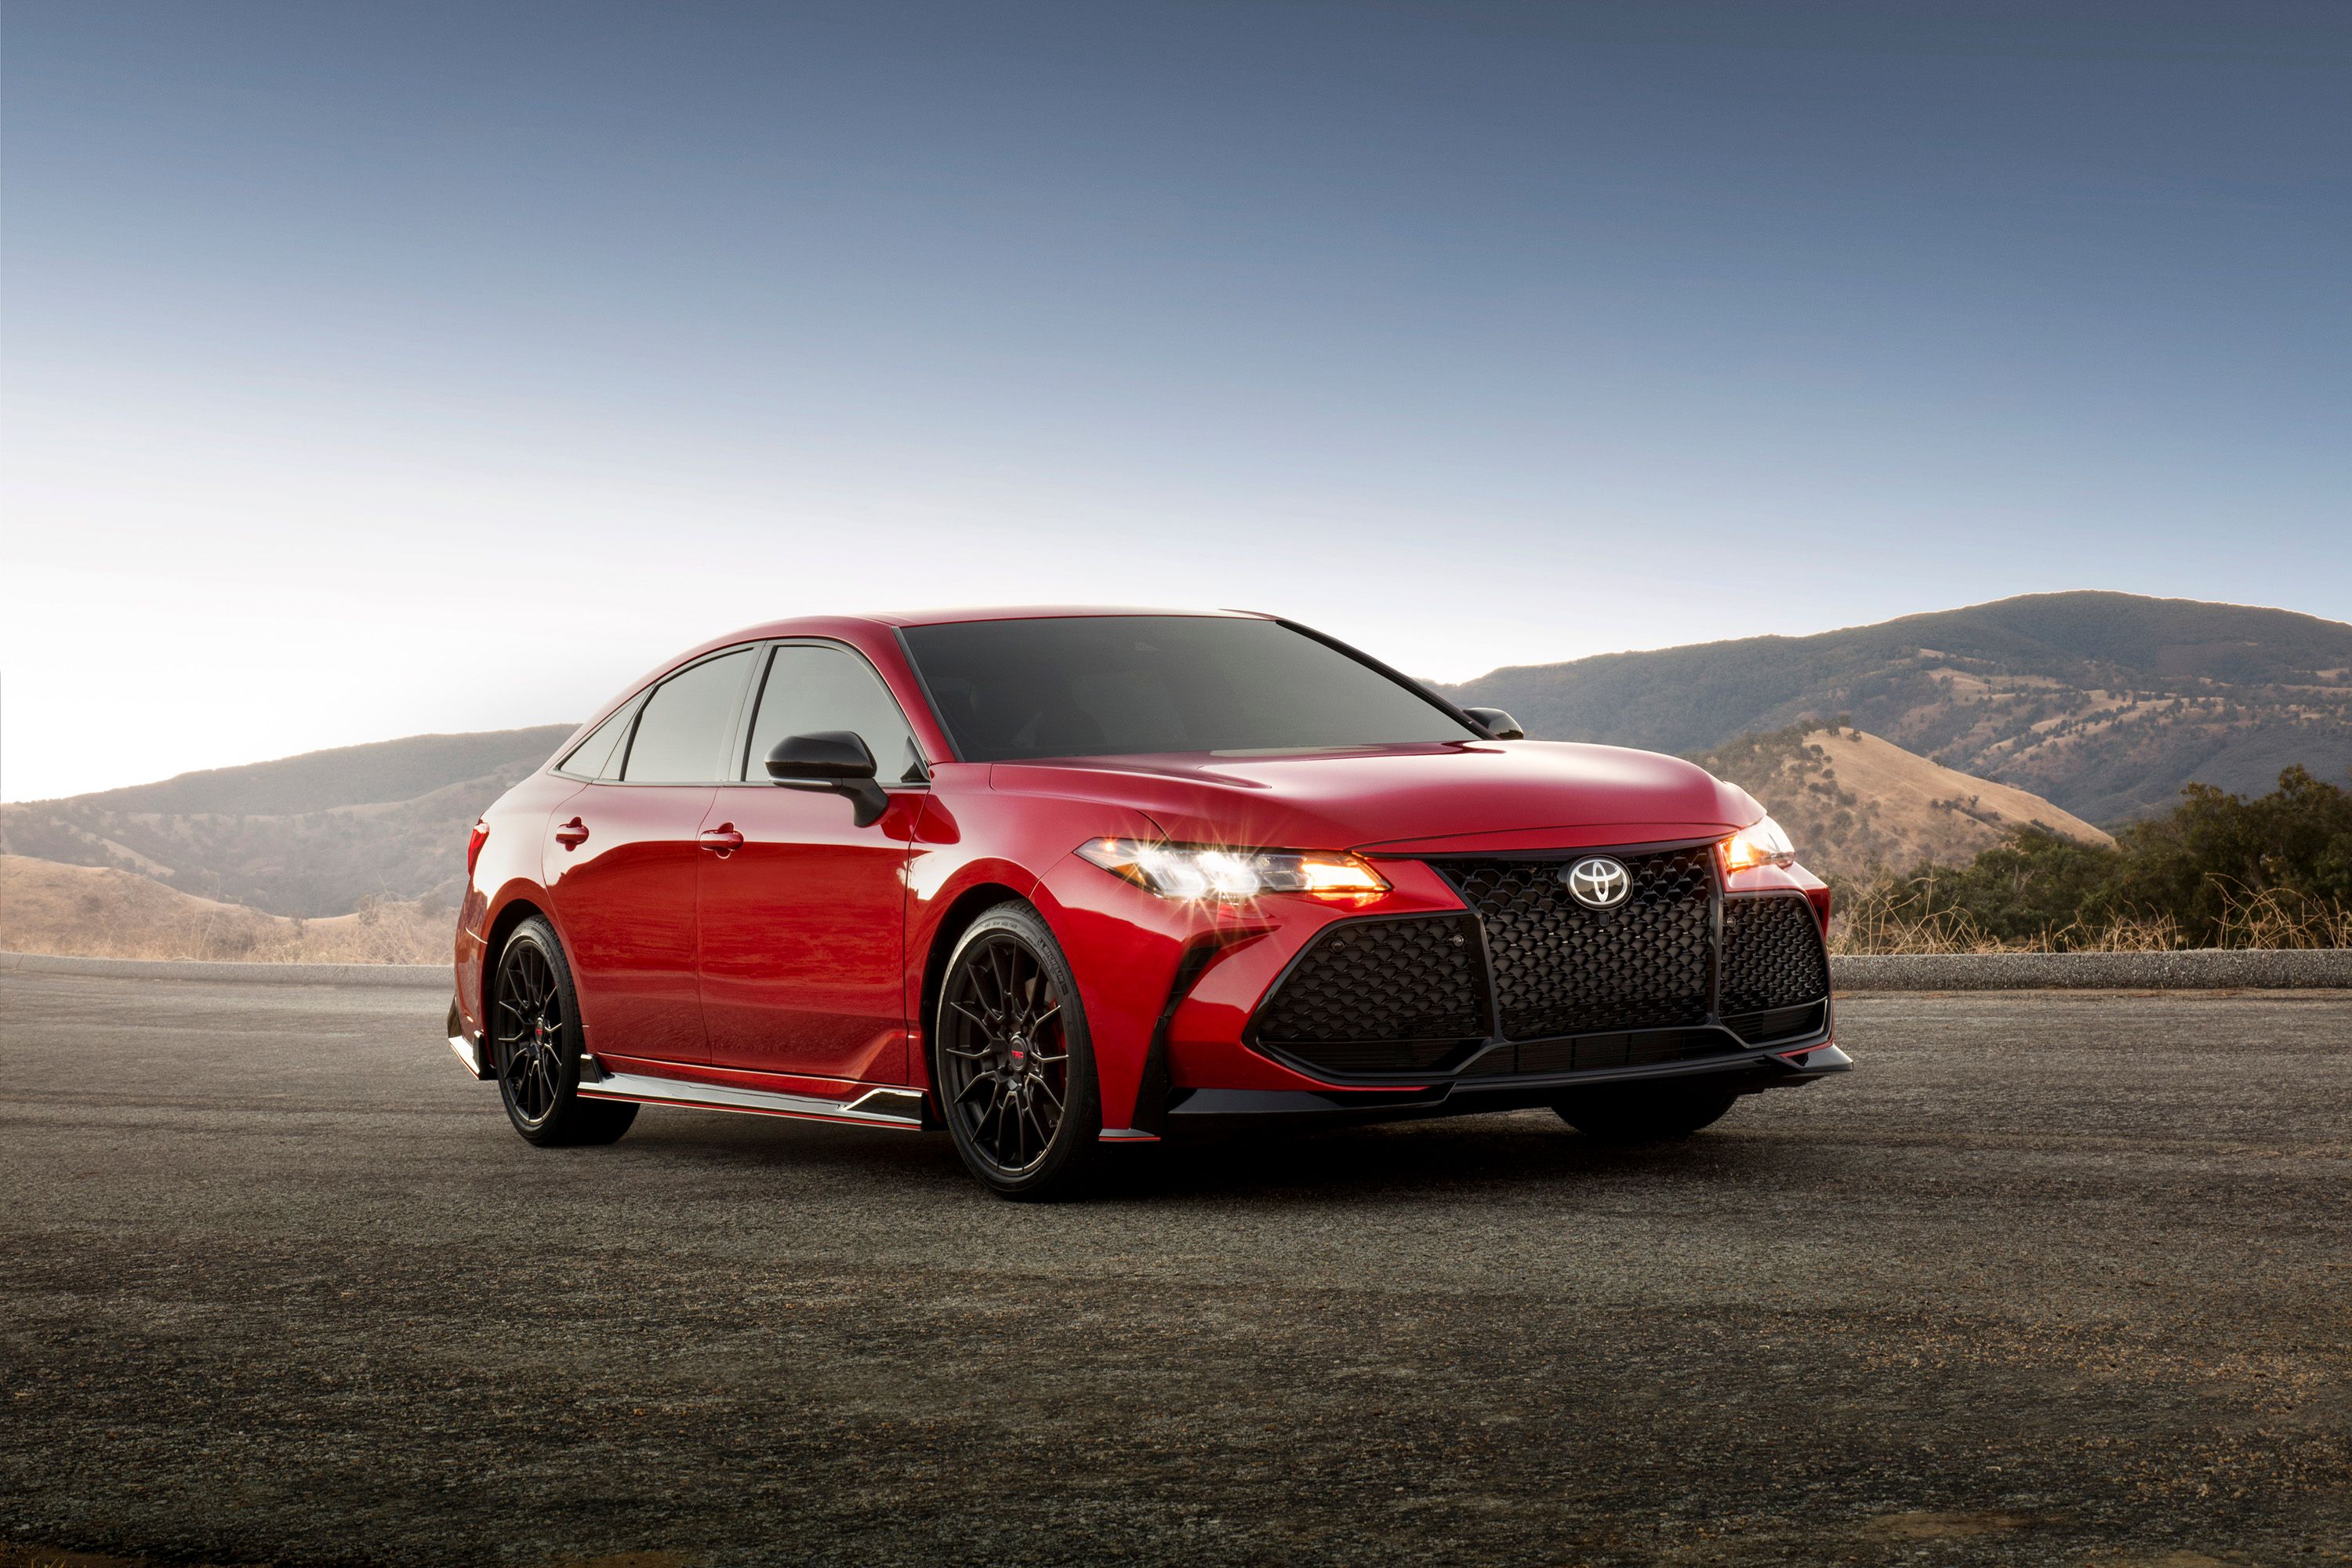 2019 Toyota Shows What the Avalon TRD Can Do With a Handbrake, But We Can't Have One